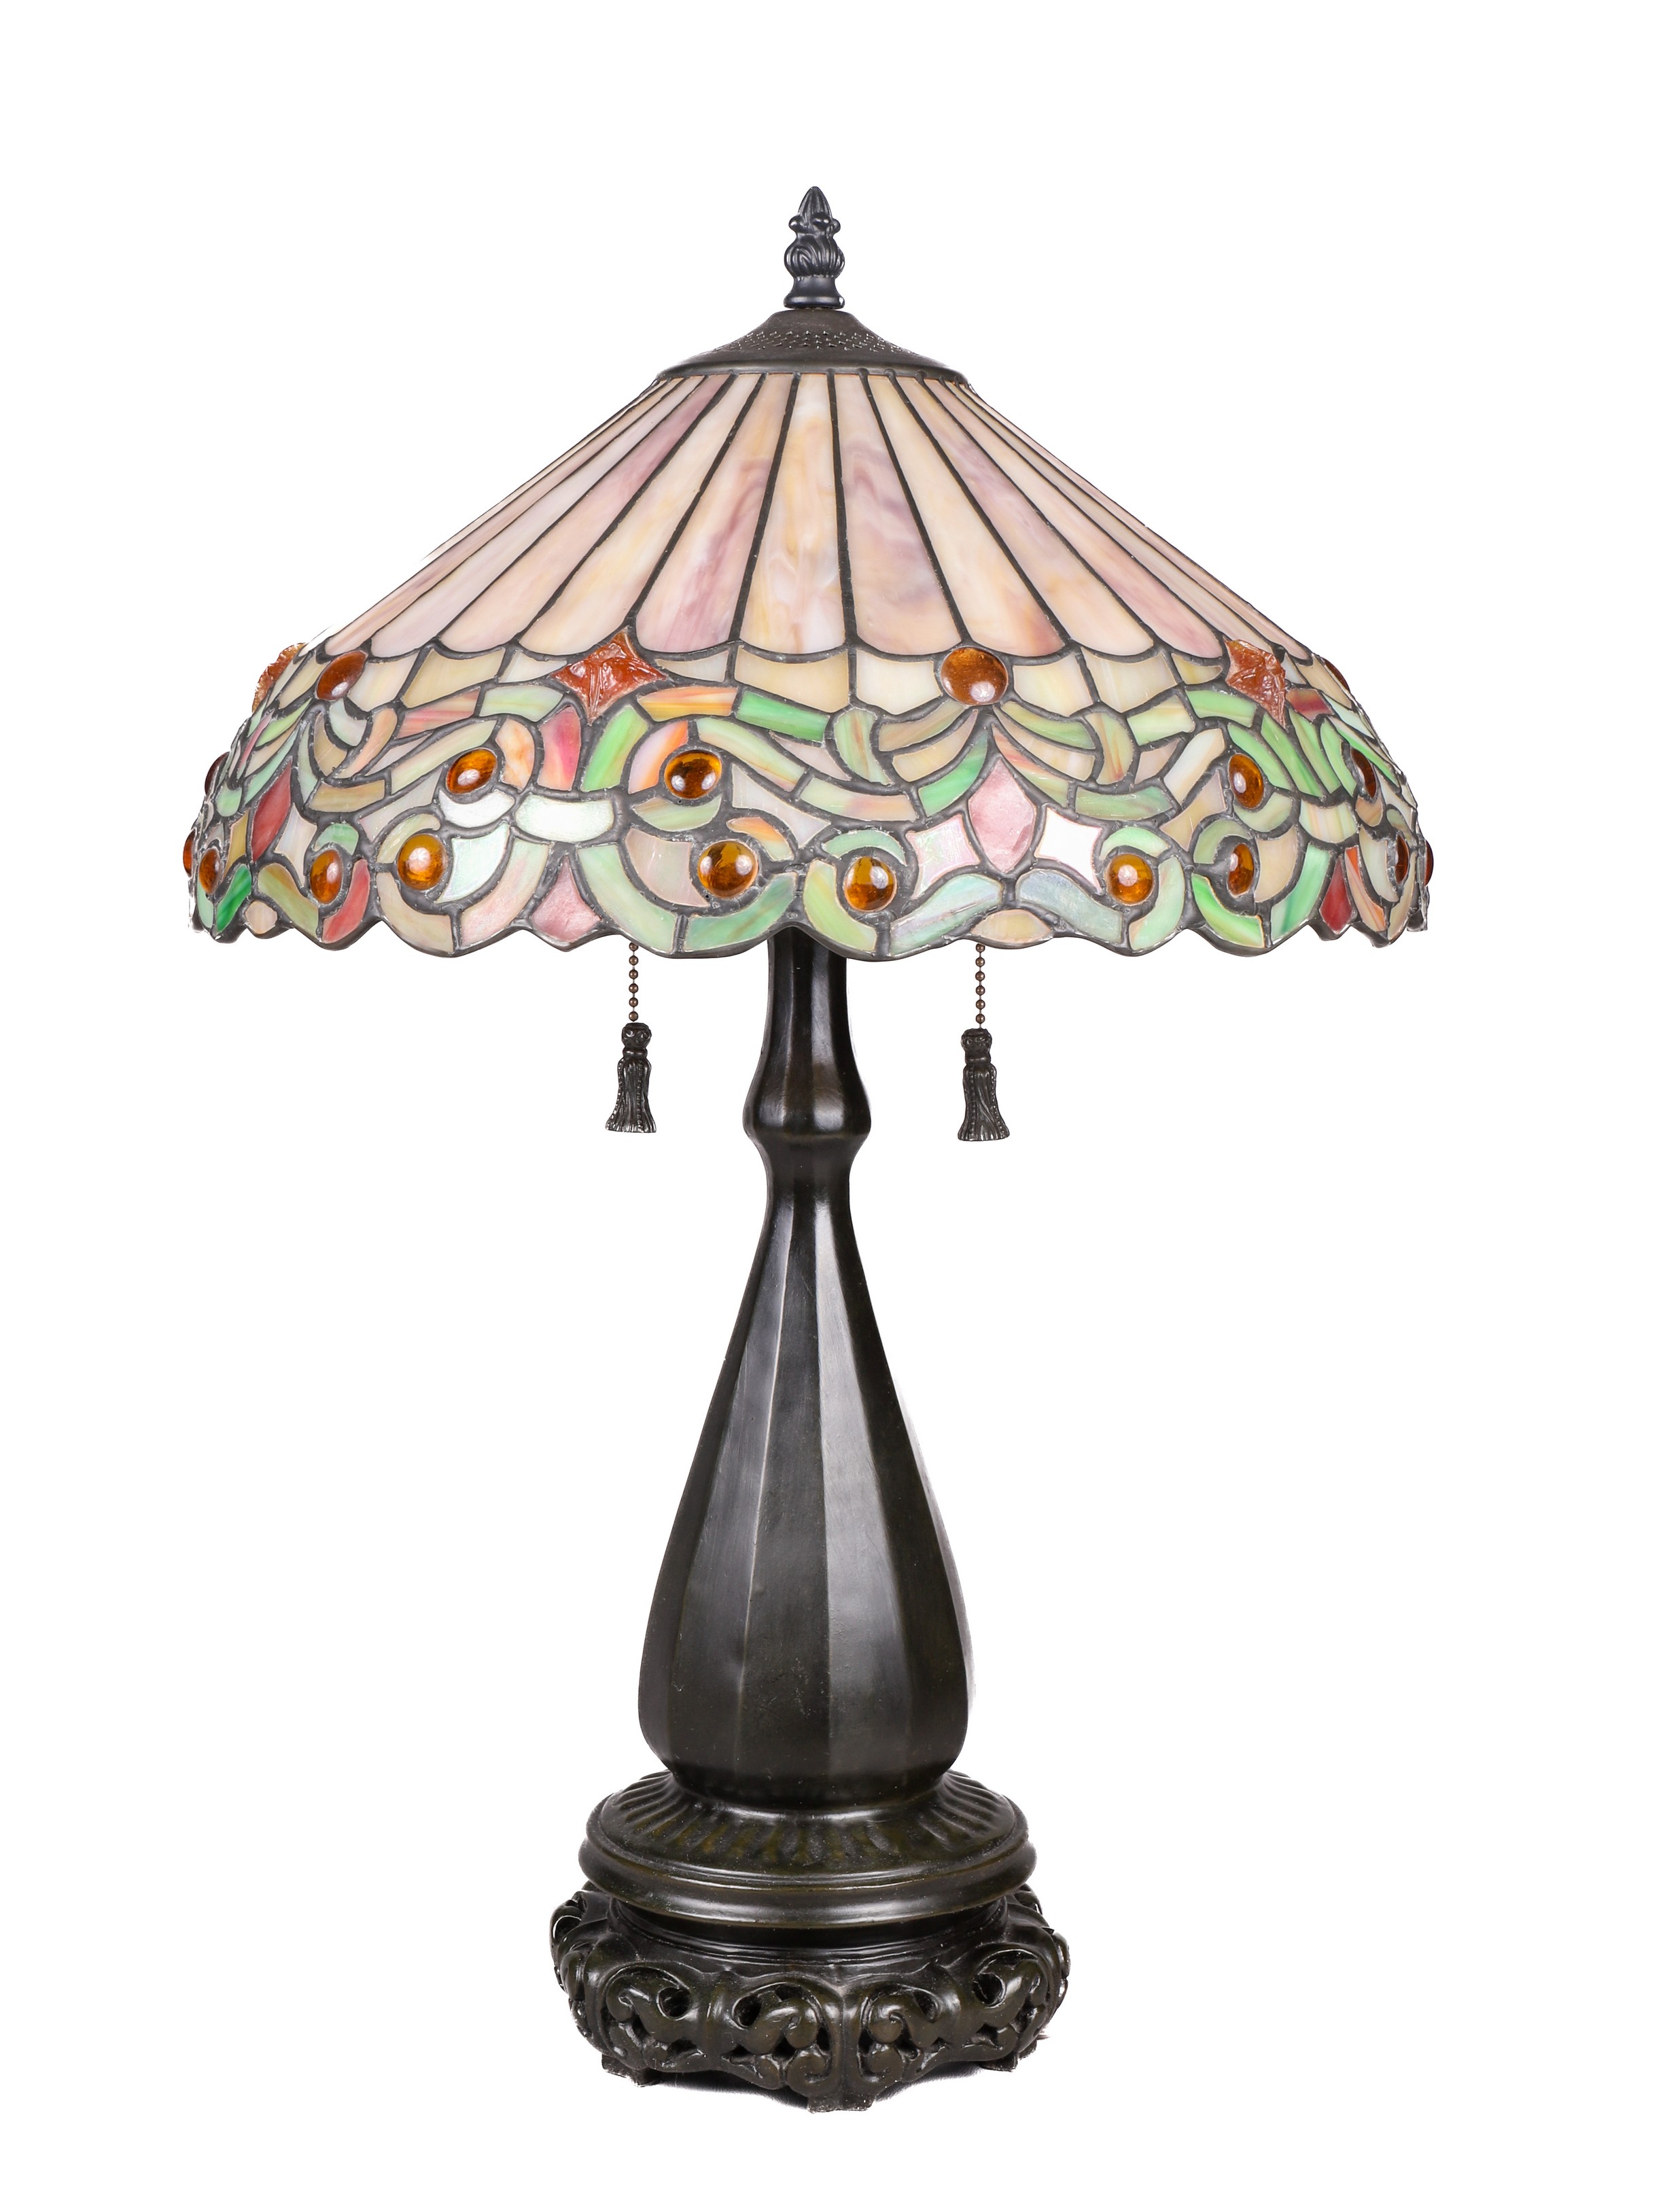 Quoizel stained glass table lamp,